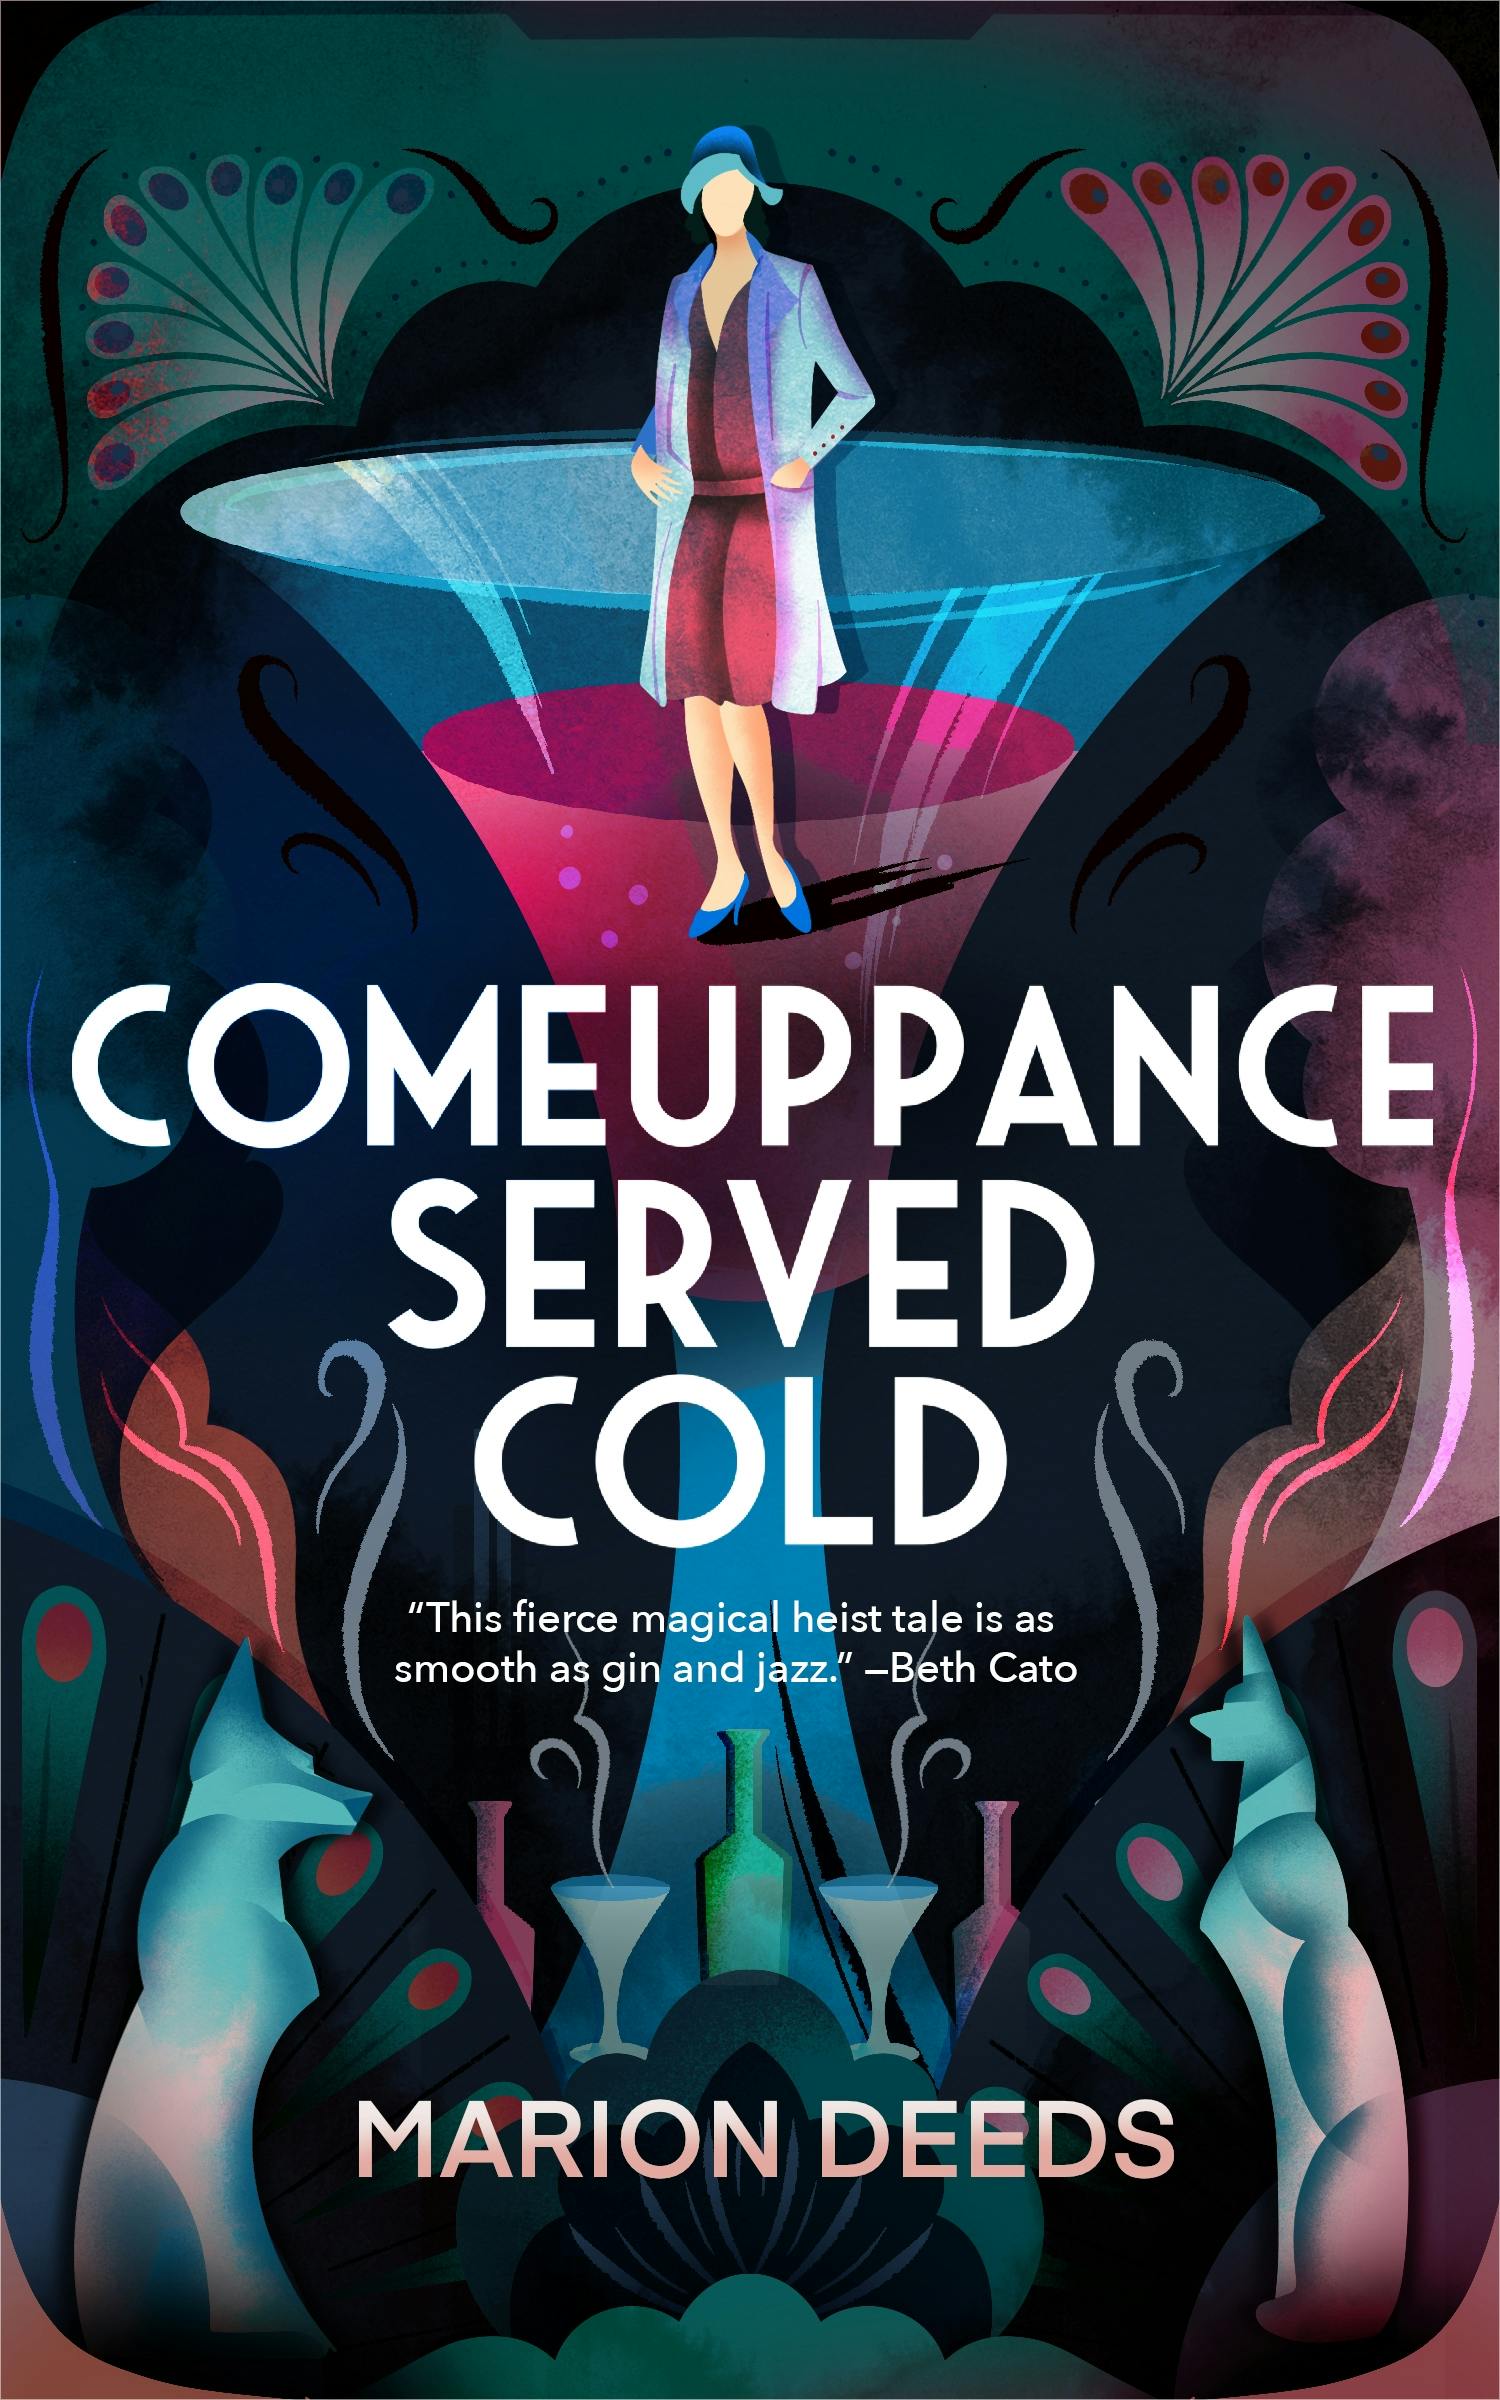 Cover for the book titled as: Comeuppance Served Cold